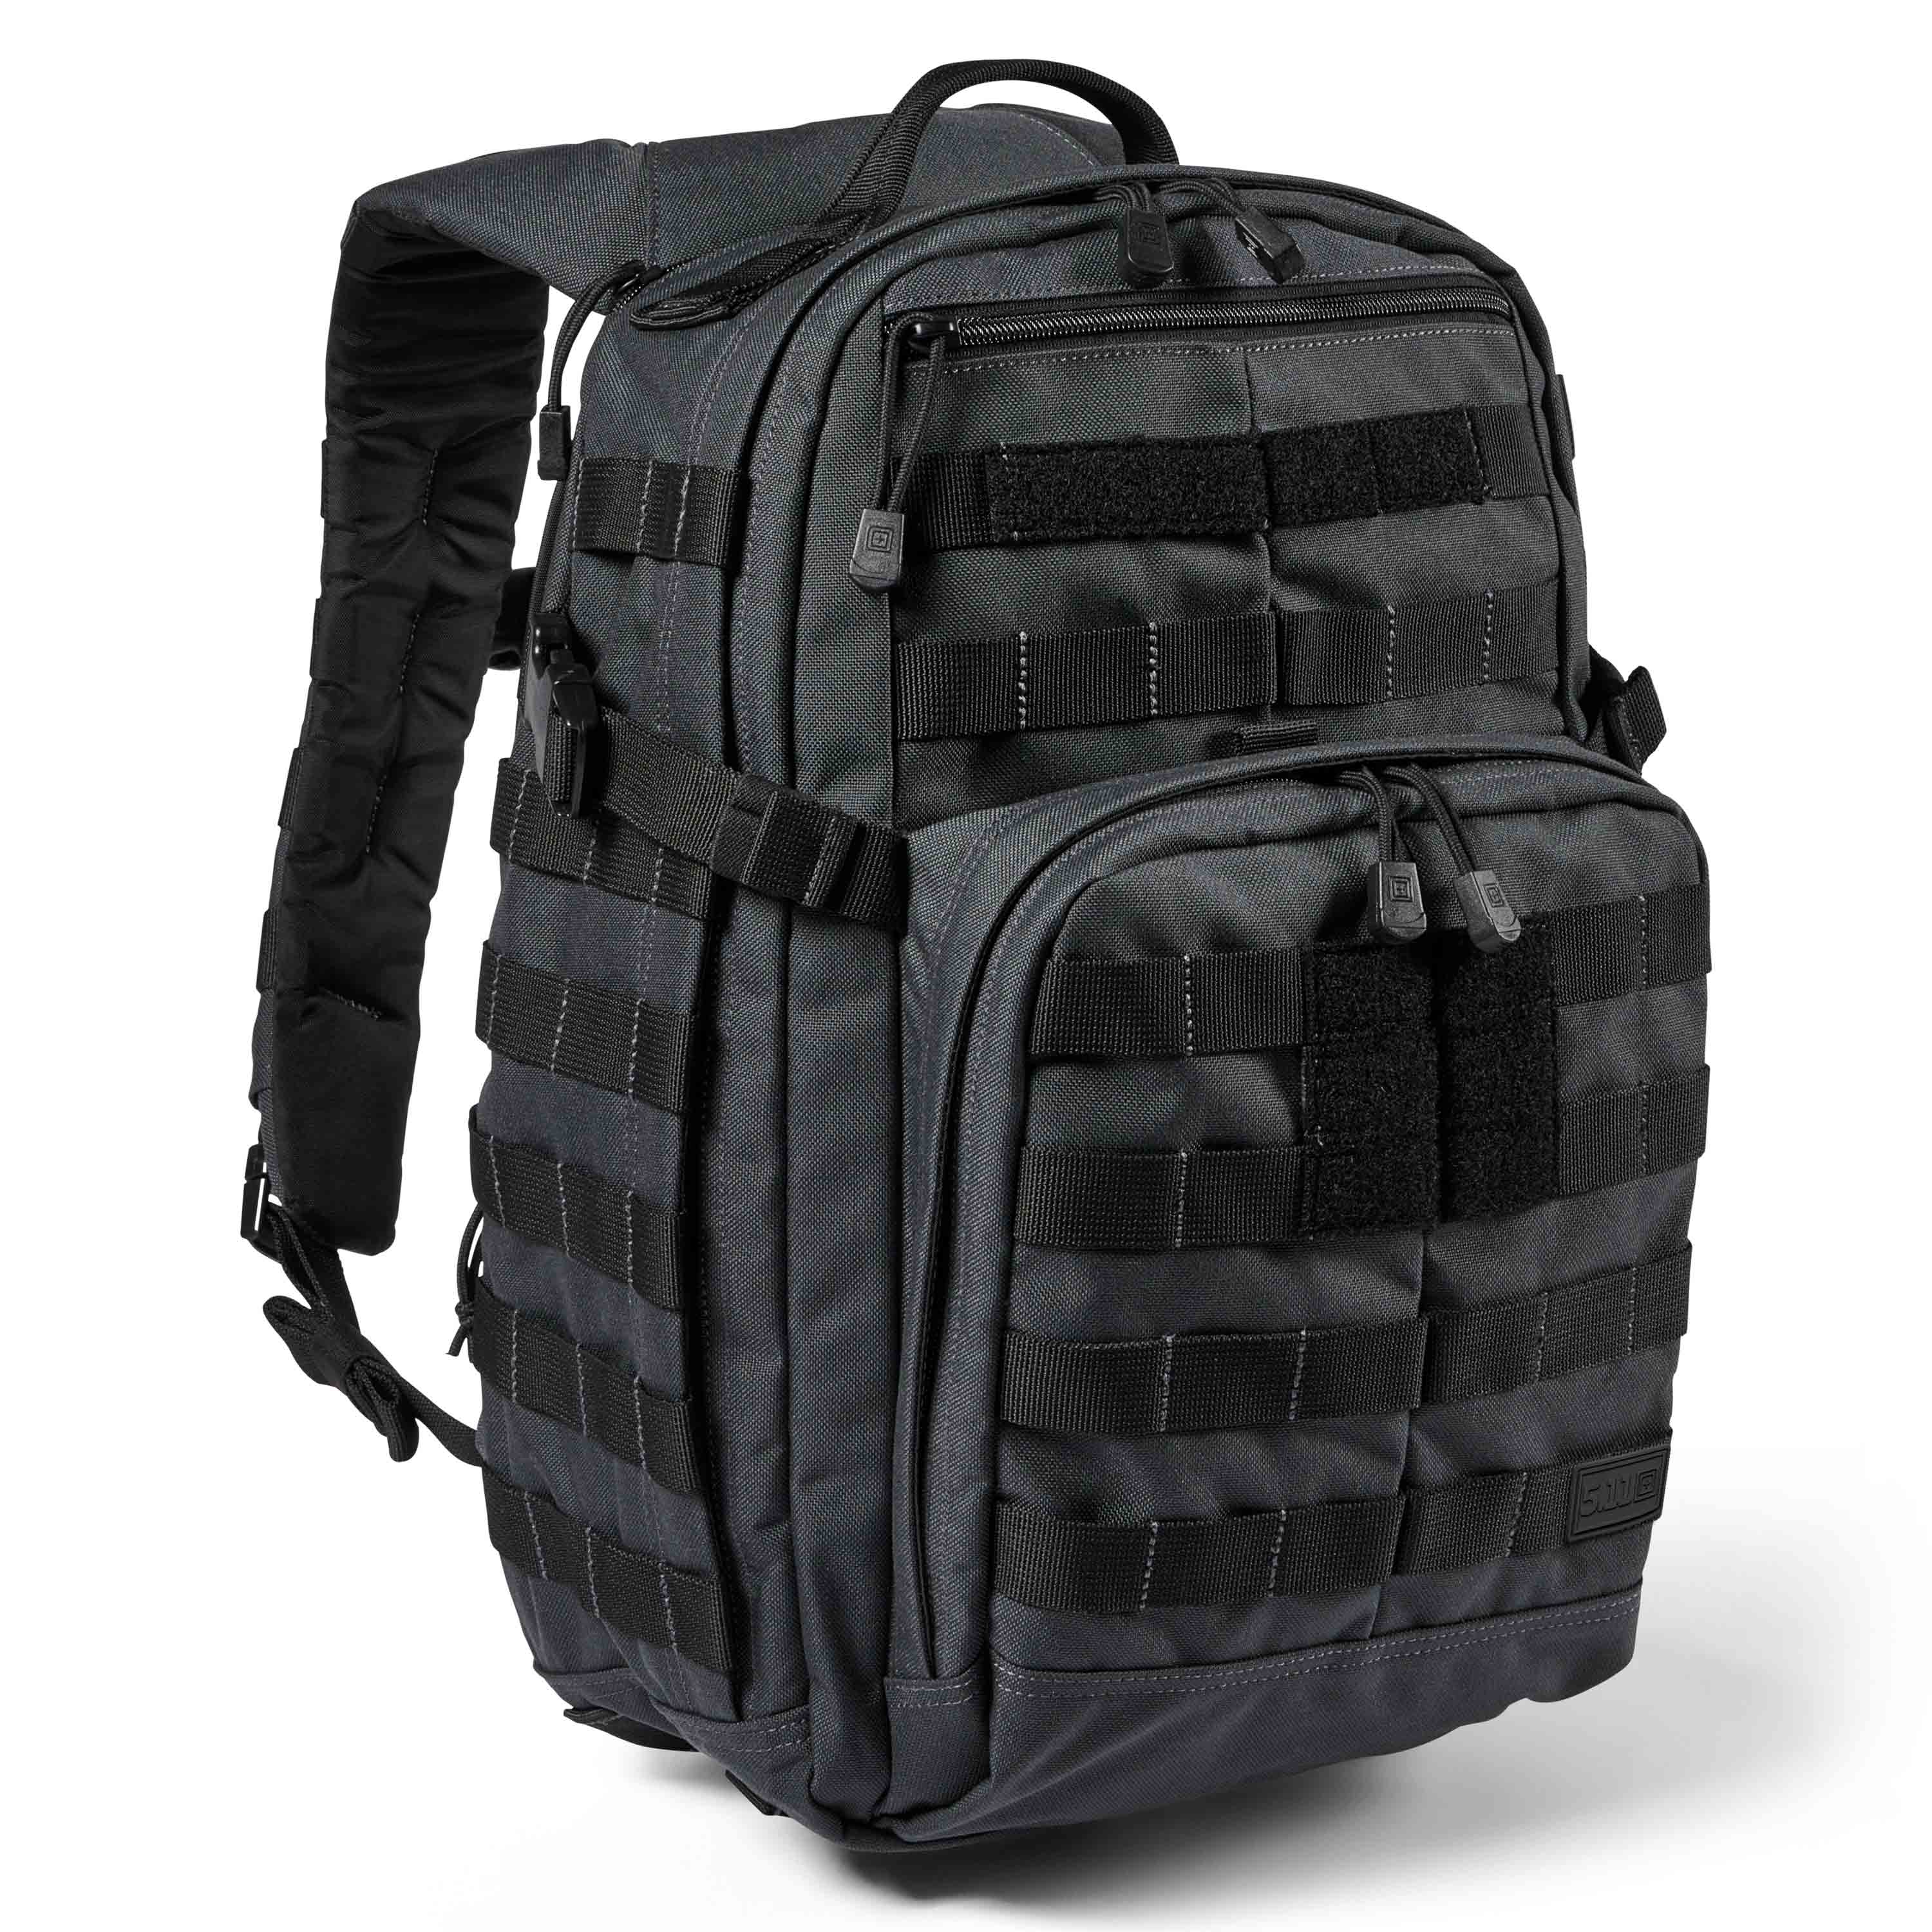 5.11 Backpack Rush 12 2.0 double tap | 5.11 Backpack Rush 12 2.0 double ...